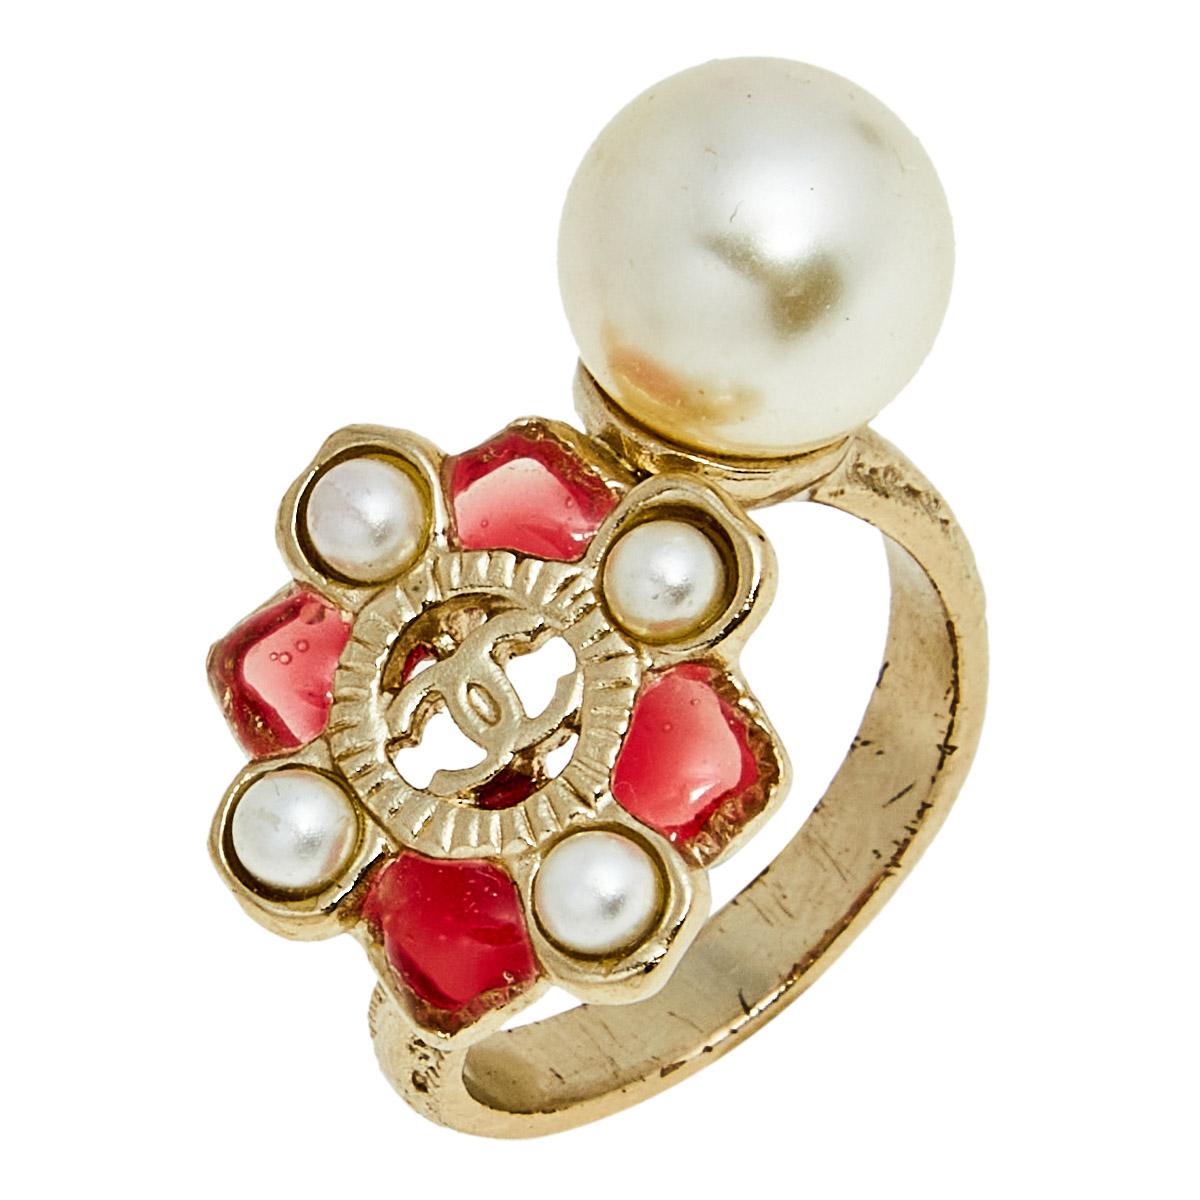 Chanel Pink Gripoix Pearl Gold Tone Floral Cocktail Ring Size EU 54 1